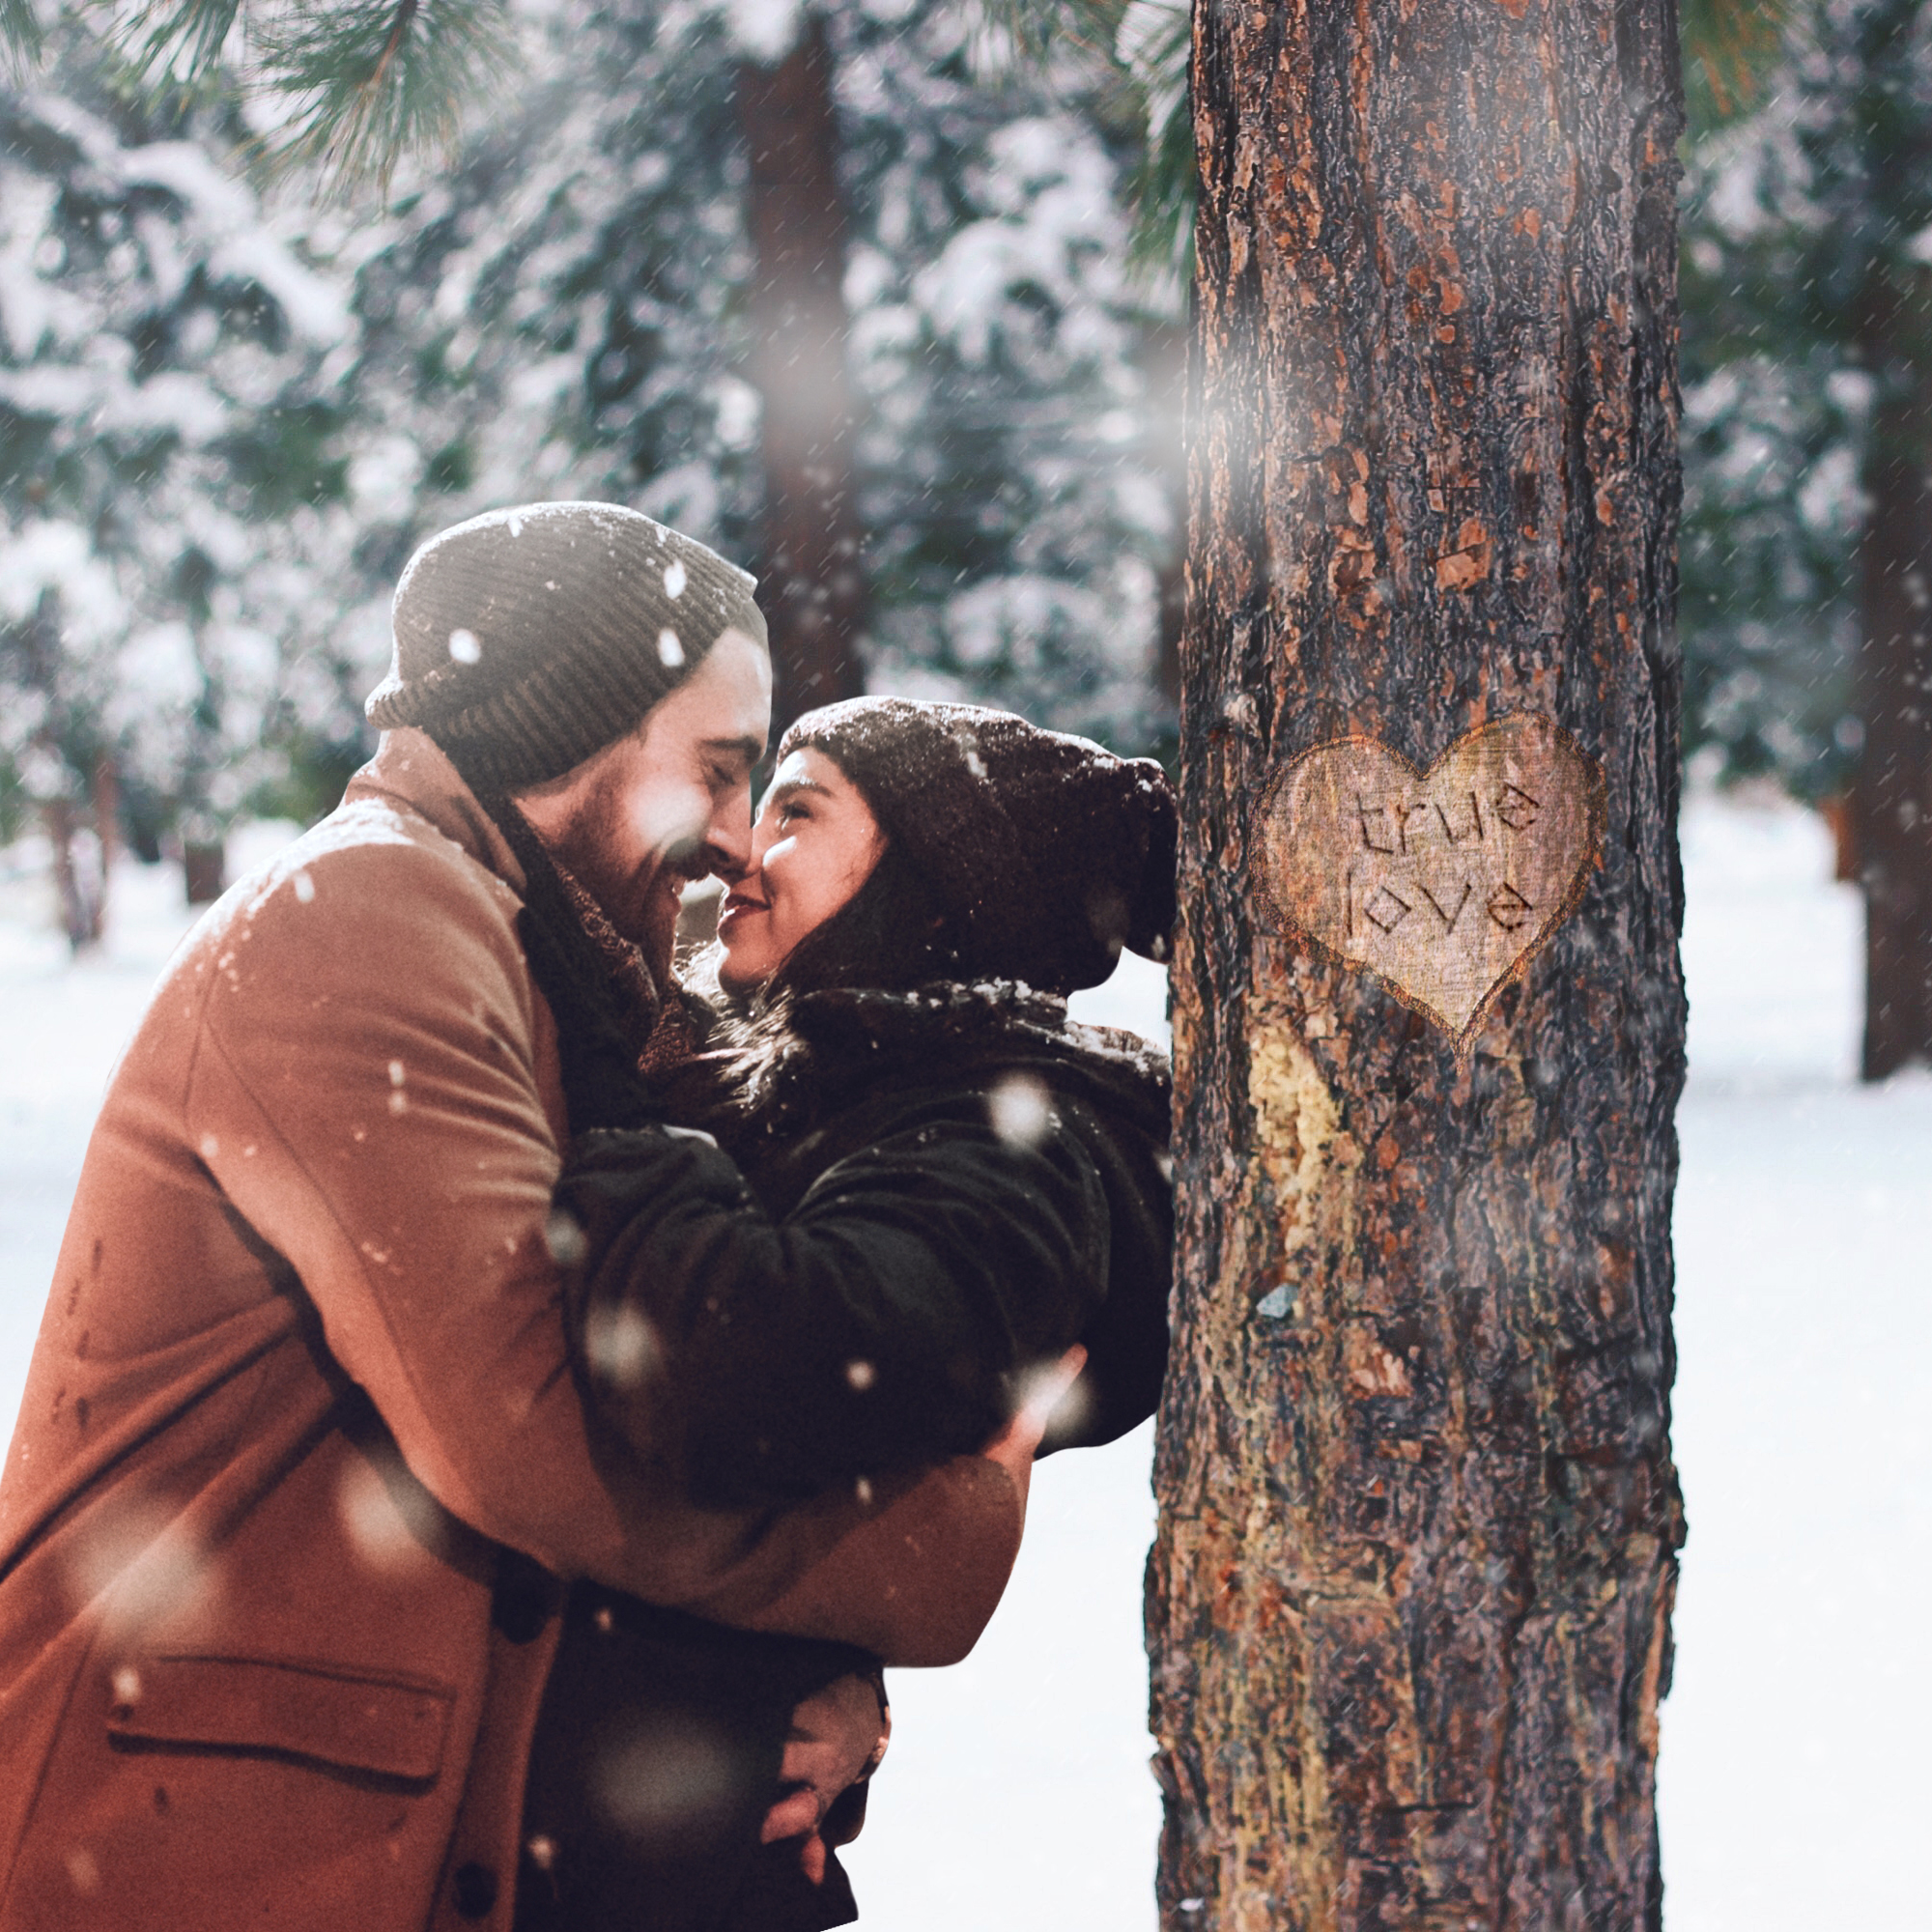 Couple kissing in front of a tree carved with the words "True Love" with snow in the background